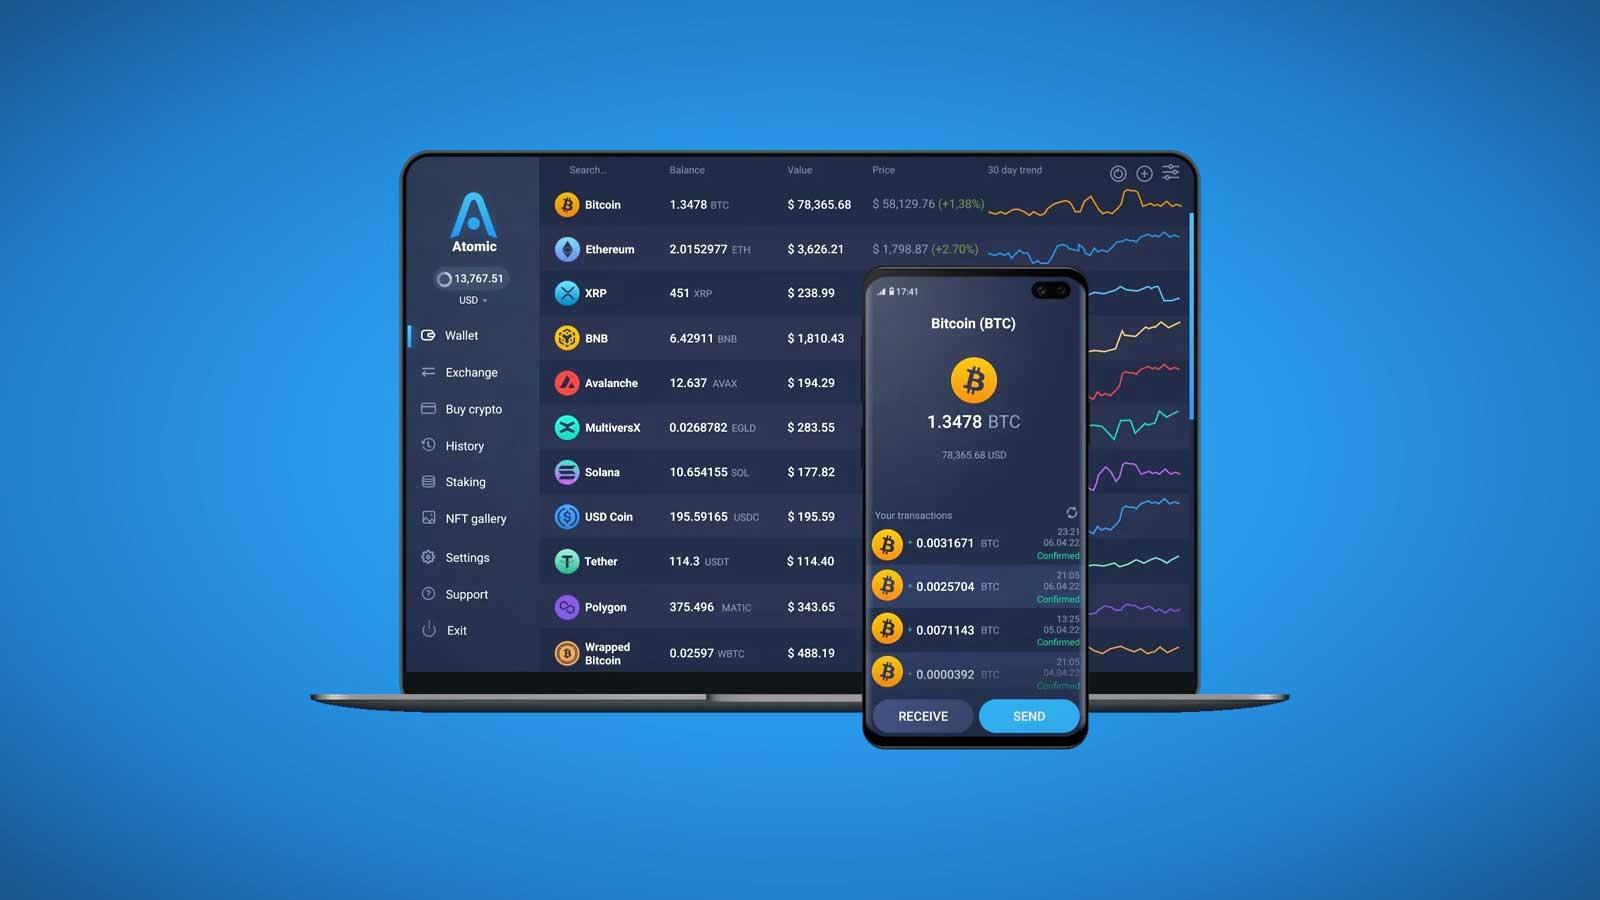 Atomic Wallet promo screen with phone and laptop